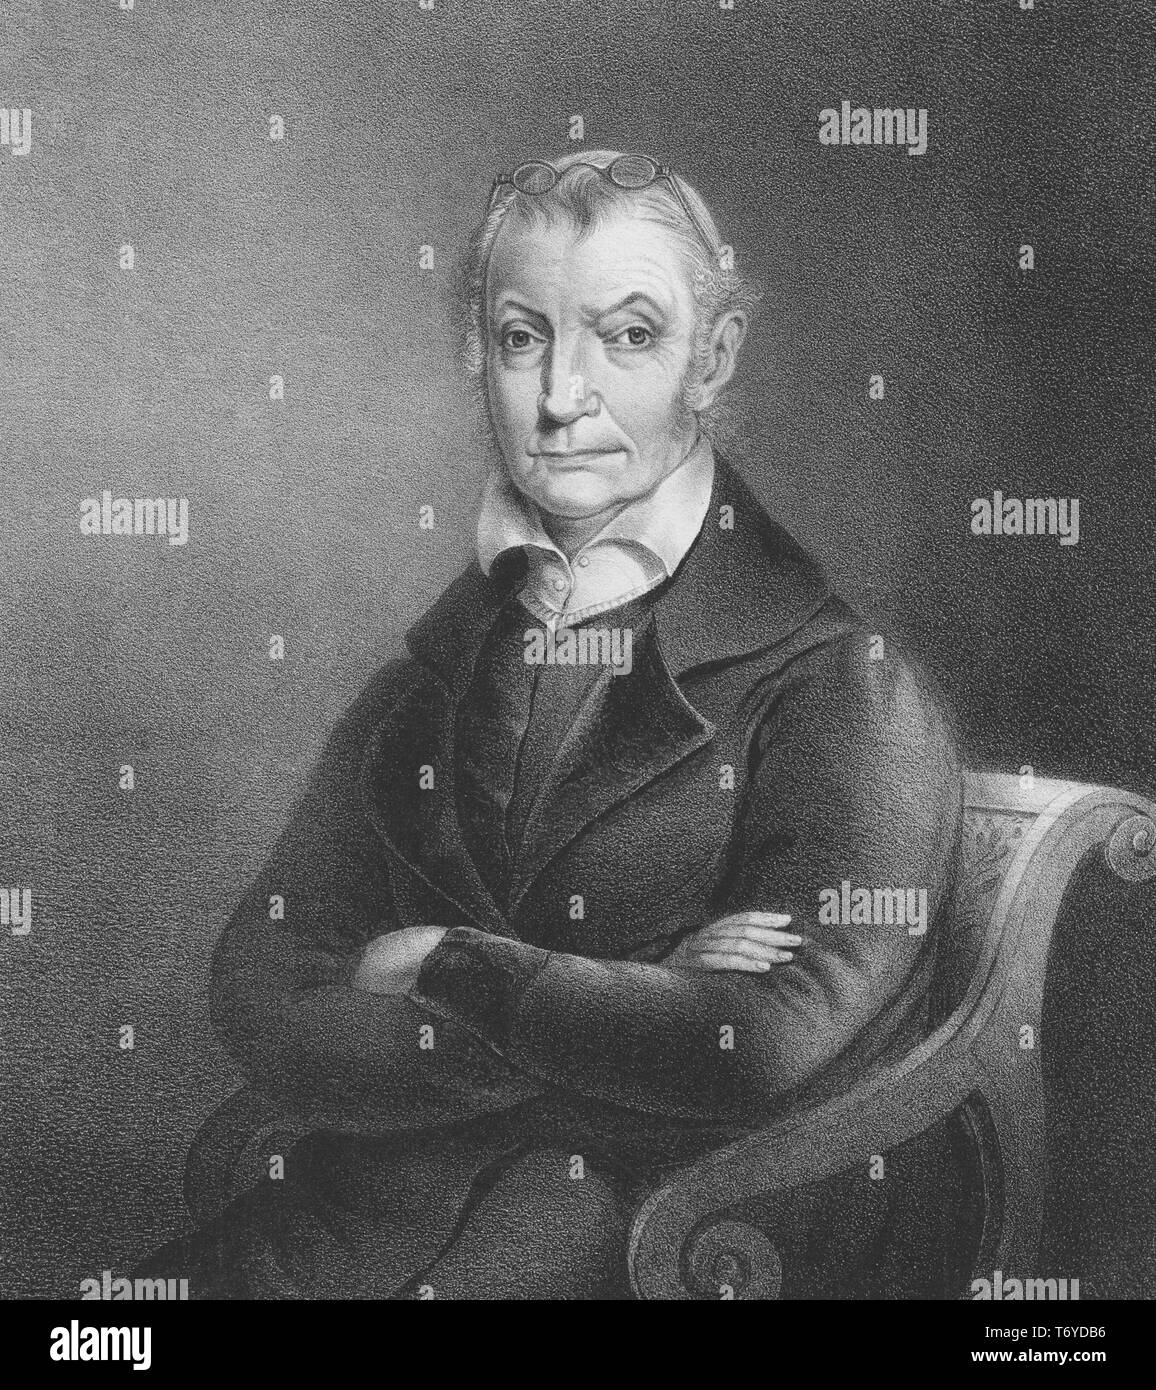 Engraved portrait of Aaron Burr, the third Vice President of the United States, an American lawyer and politician from Newark, New Jersey, 1837. From the New York Public Library. () Stock Photo